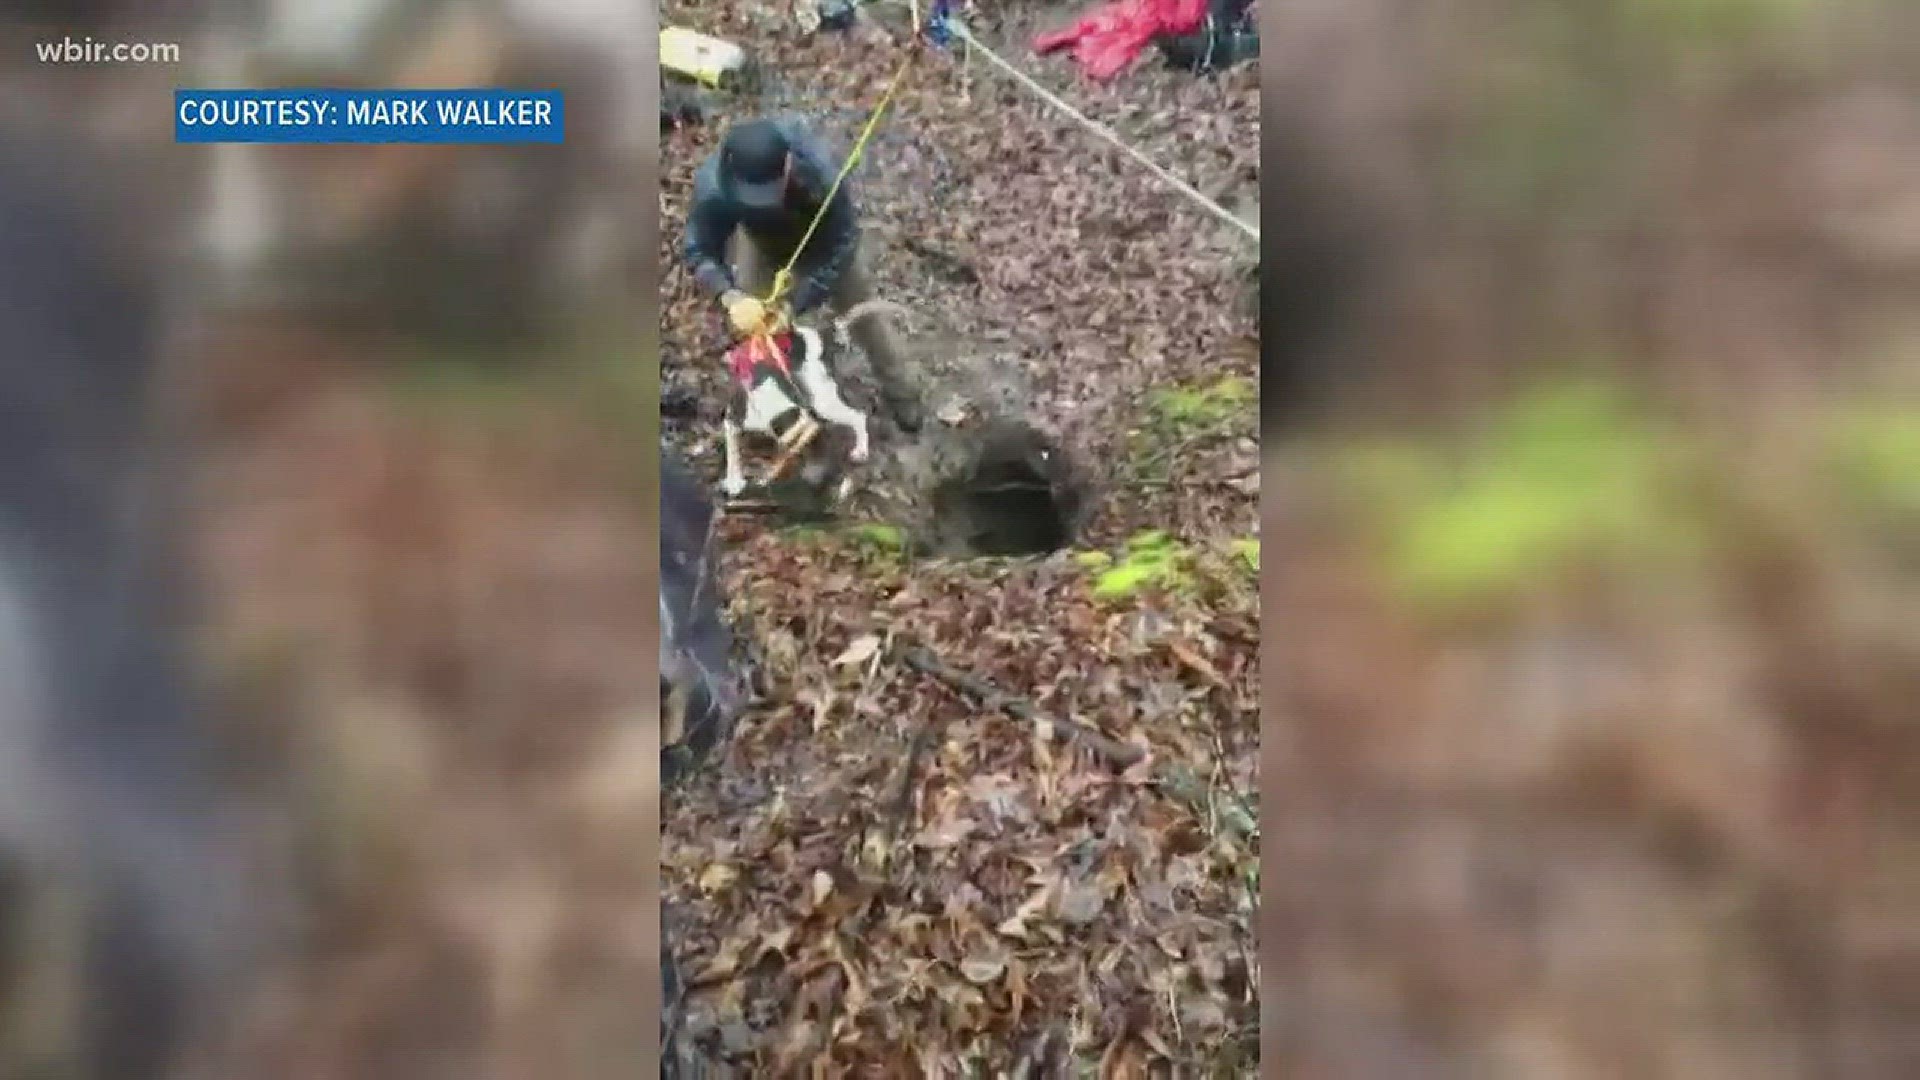 Crews helped rescue a Coonhound dog from a pit near Norris, Tenn. on Saturday.